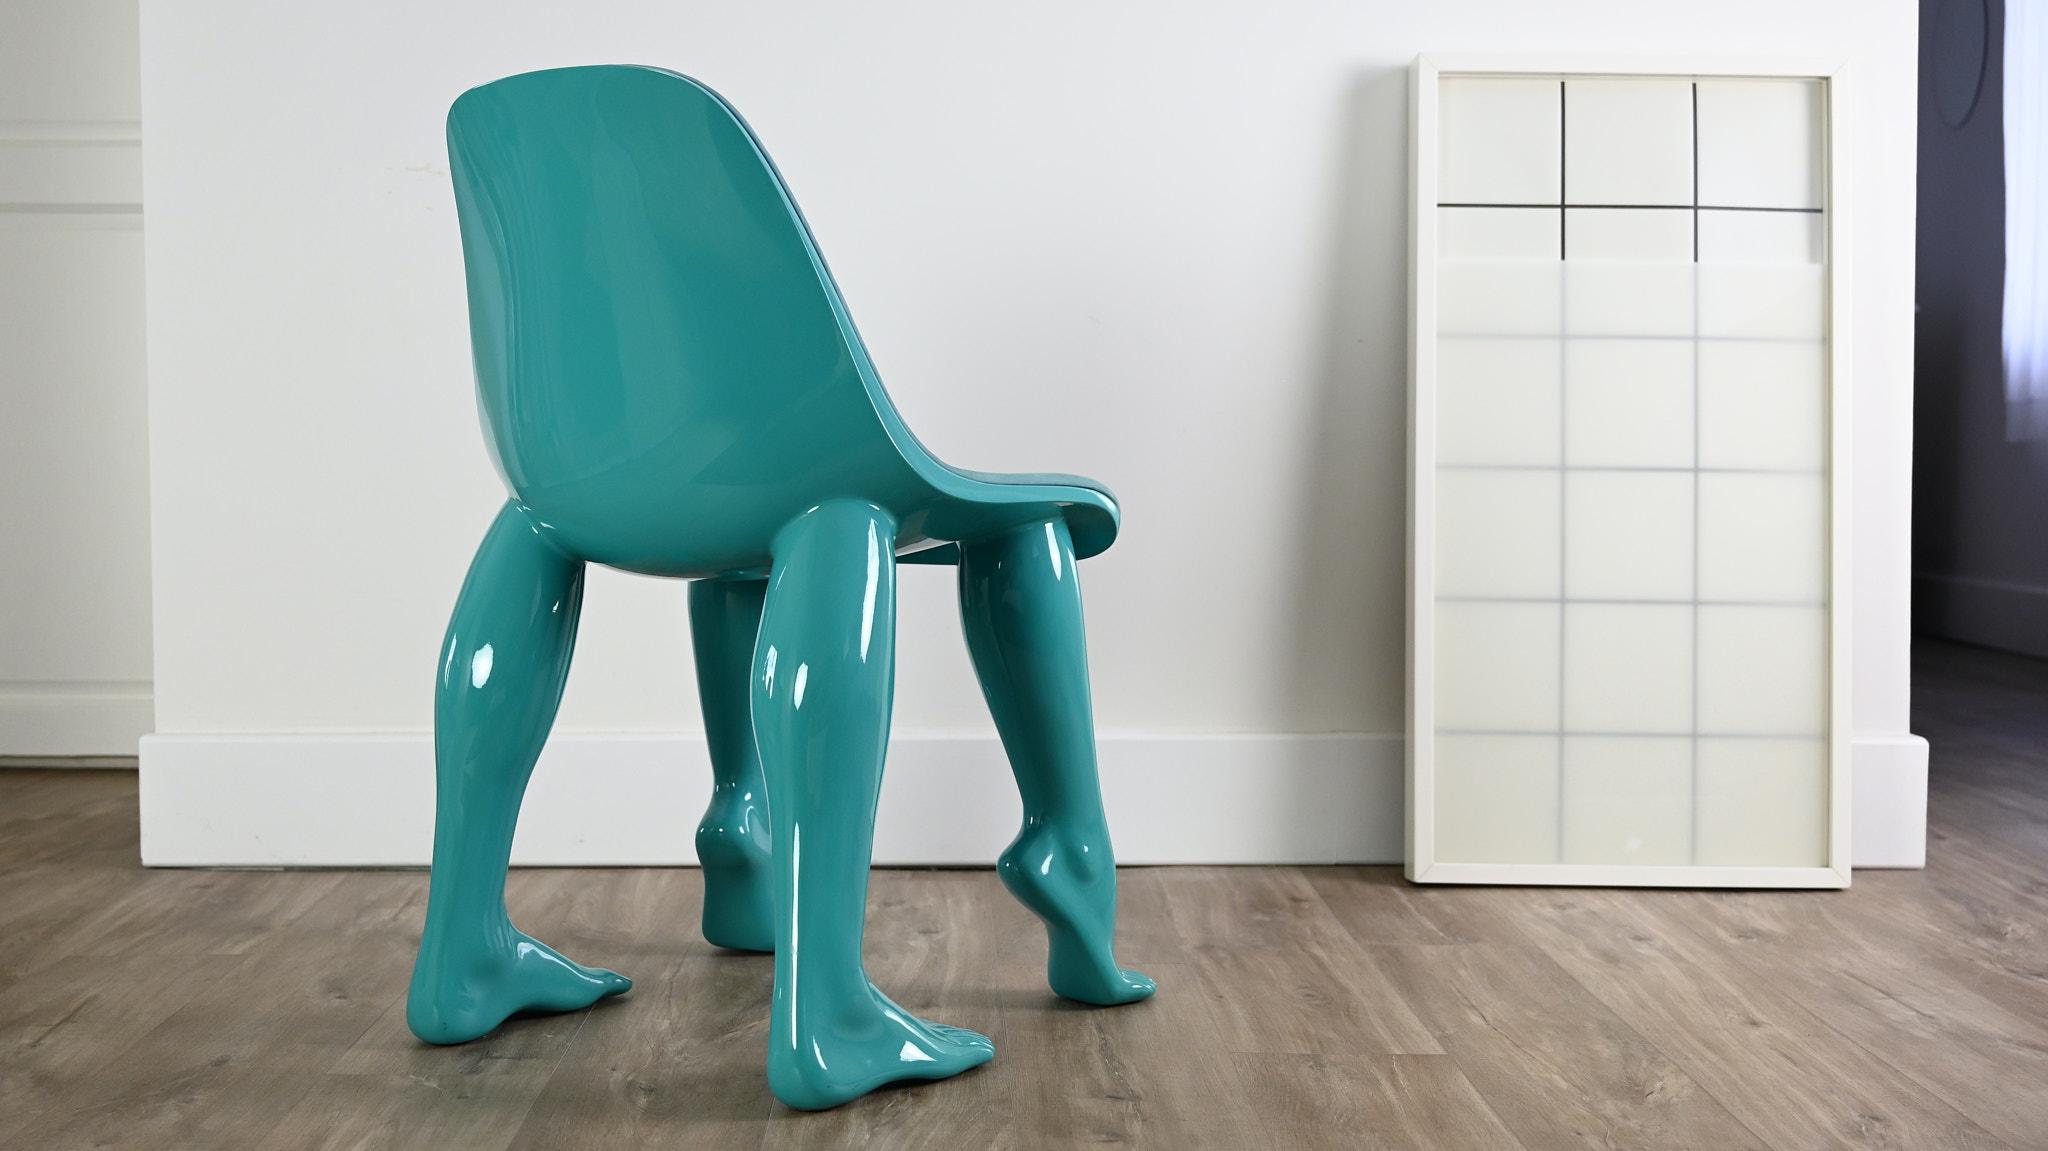 French Pharrell Williams Perspective Chair for Domeau & Pérès Resin Leather France For Sale